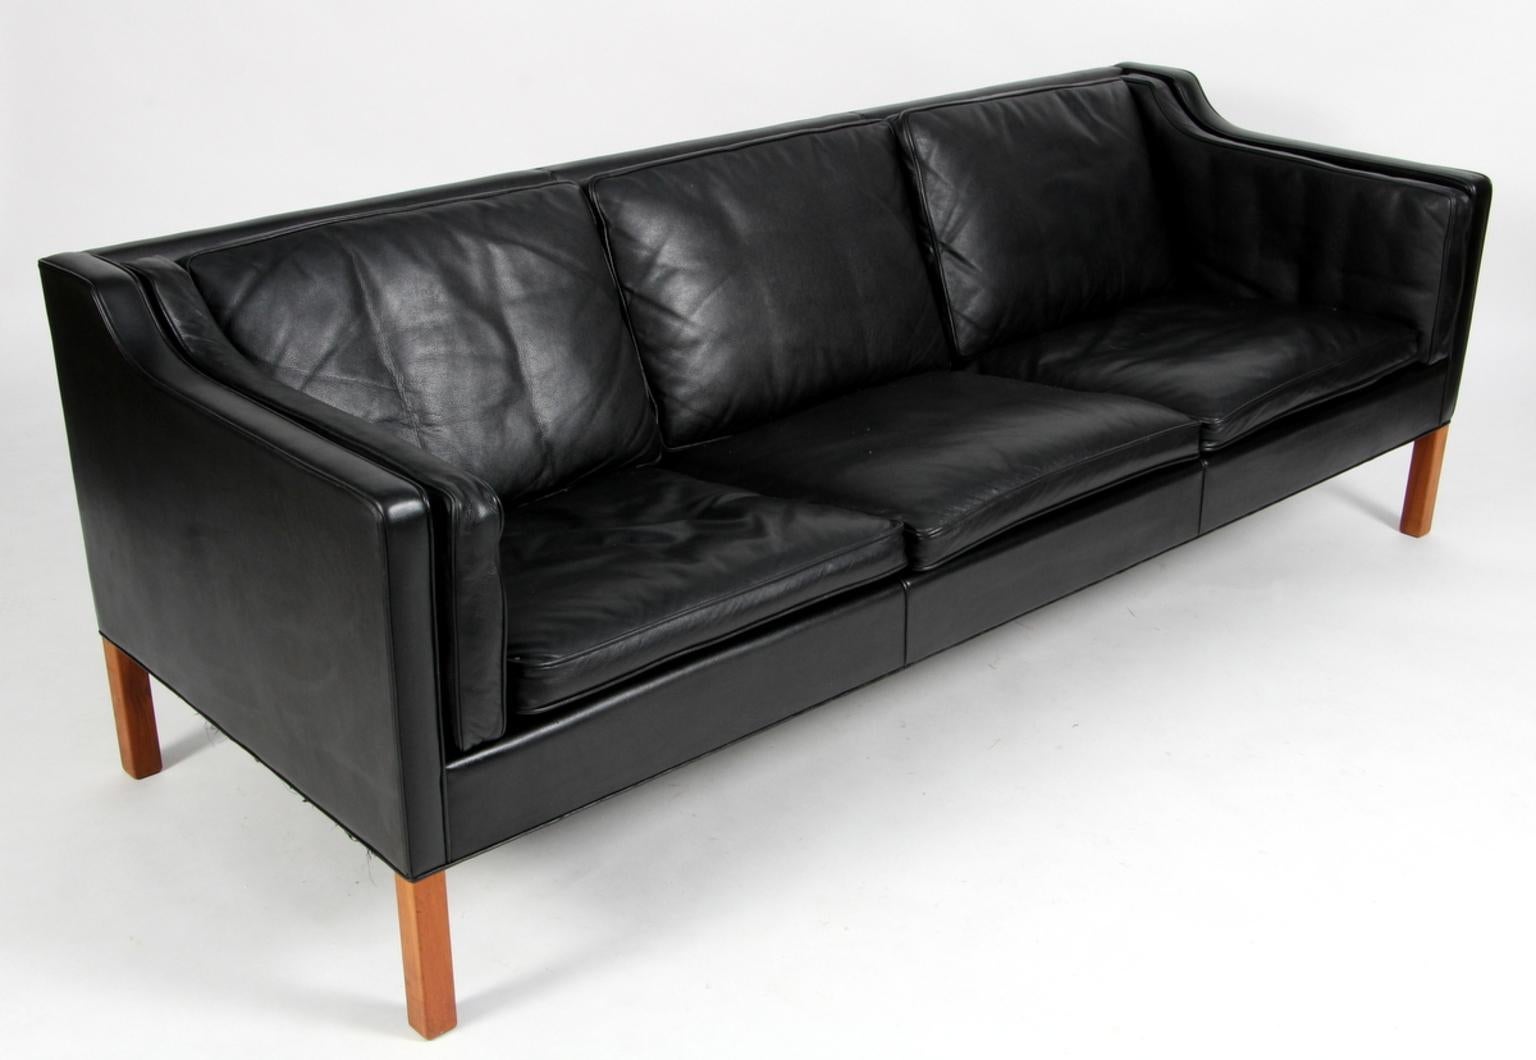 Børge Mogensen three-seat sofa with original black leather upholstery.

Legs of mahogany.

Model 2213, made by Fredericia Furniture.